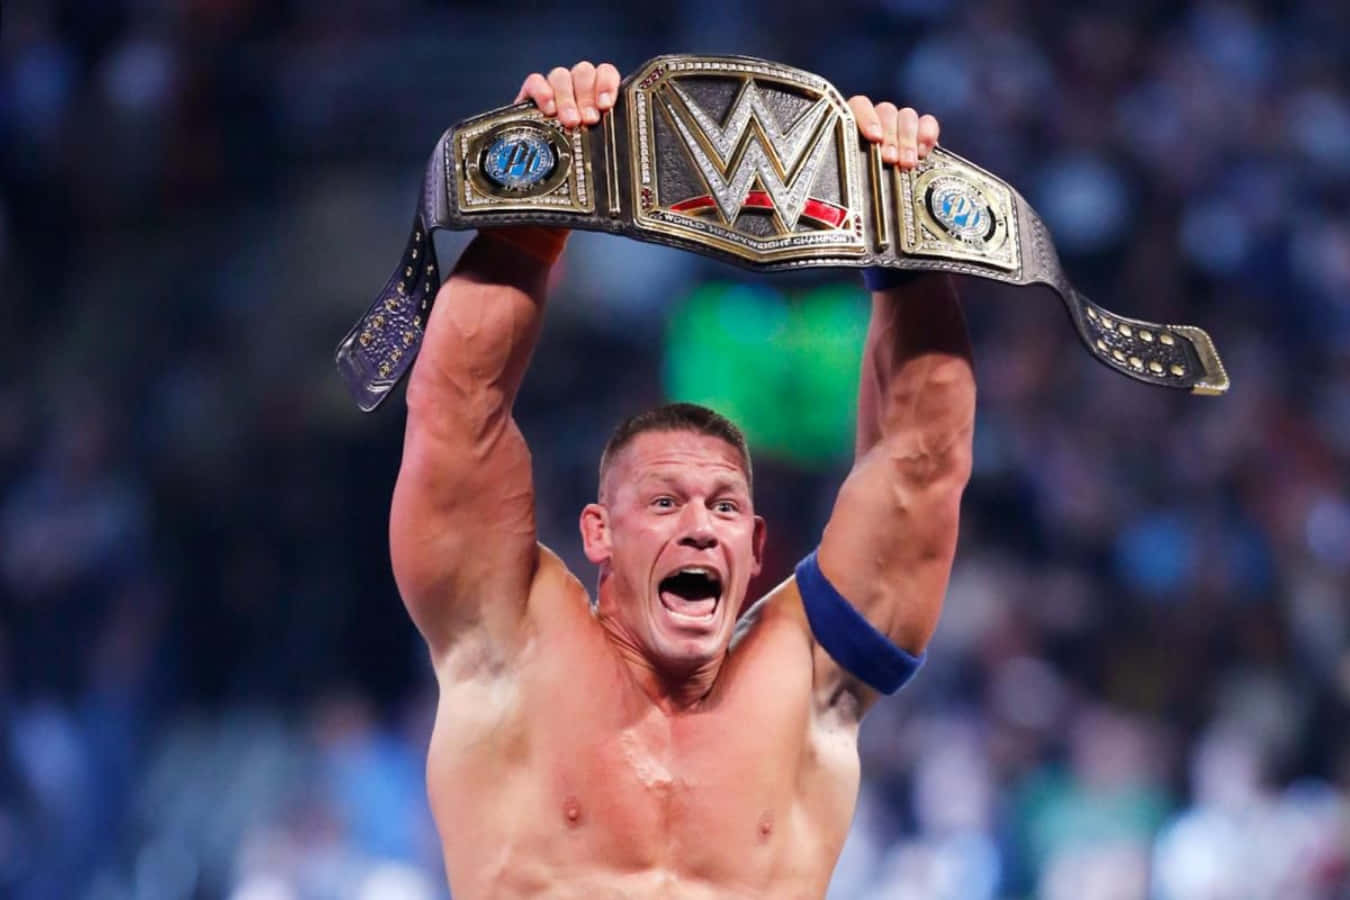 John Cena flexing his muscles in a victorious pose